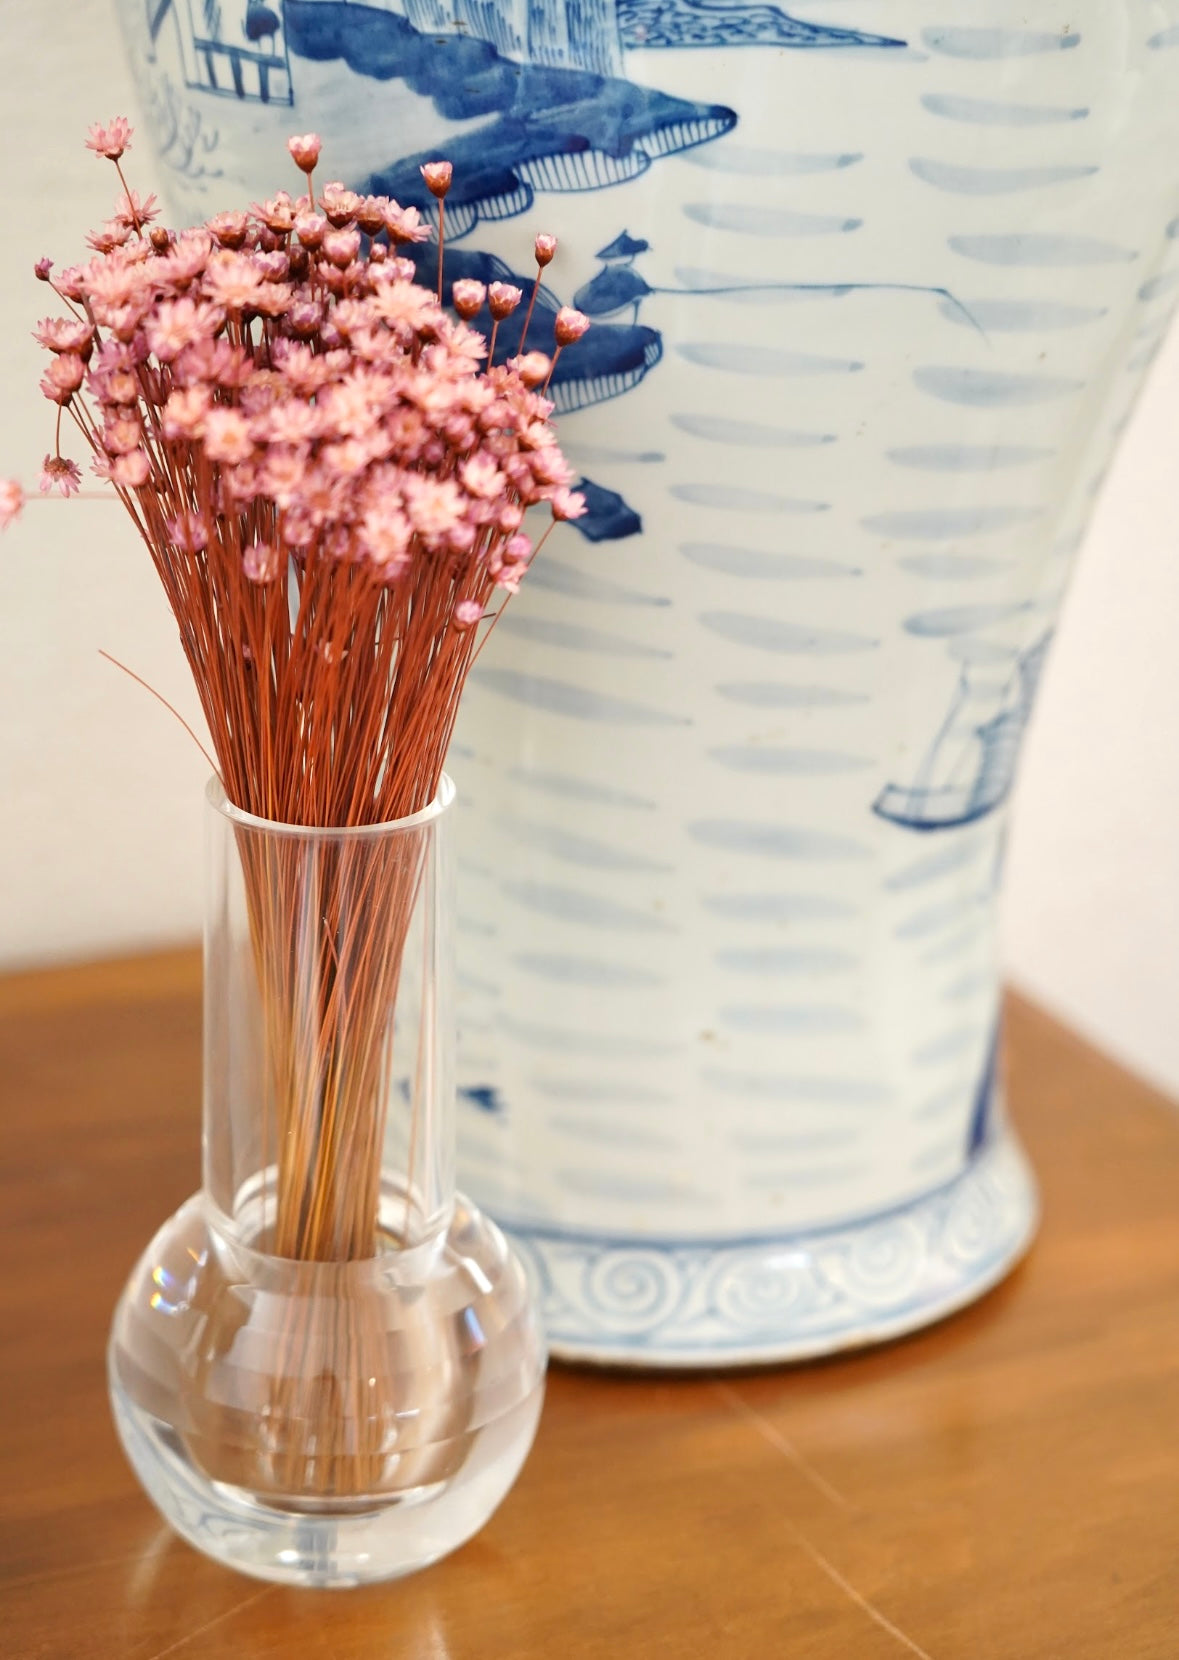 CUT ACRYLIC VASE WITH DRIED FLOWERS